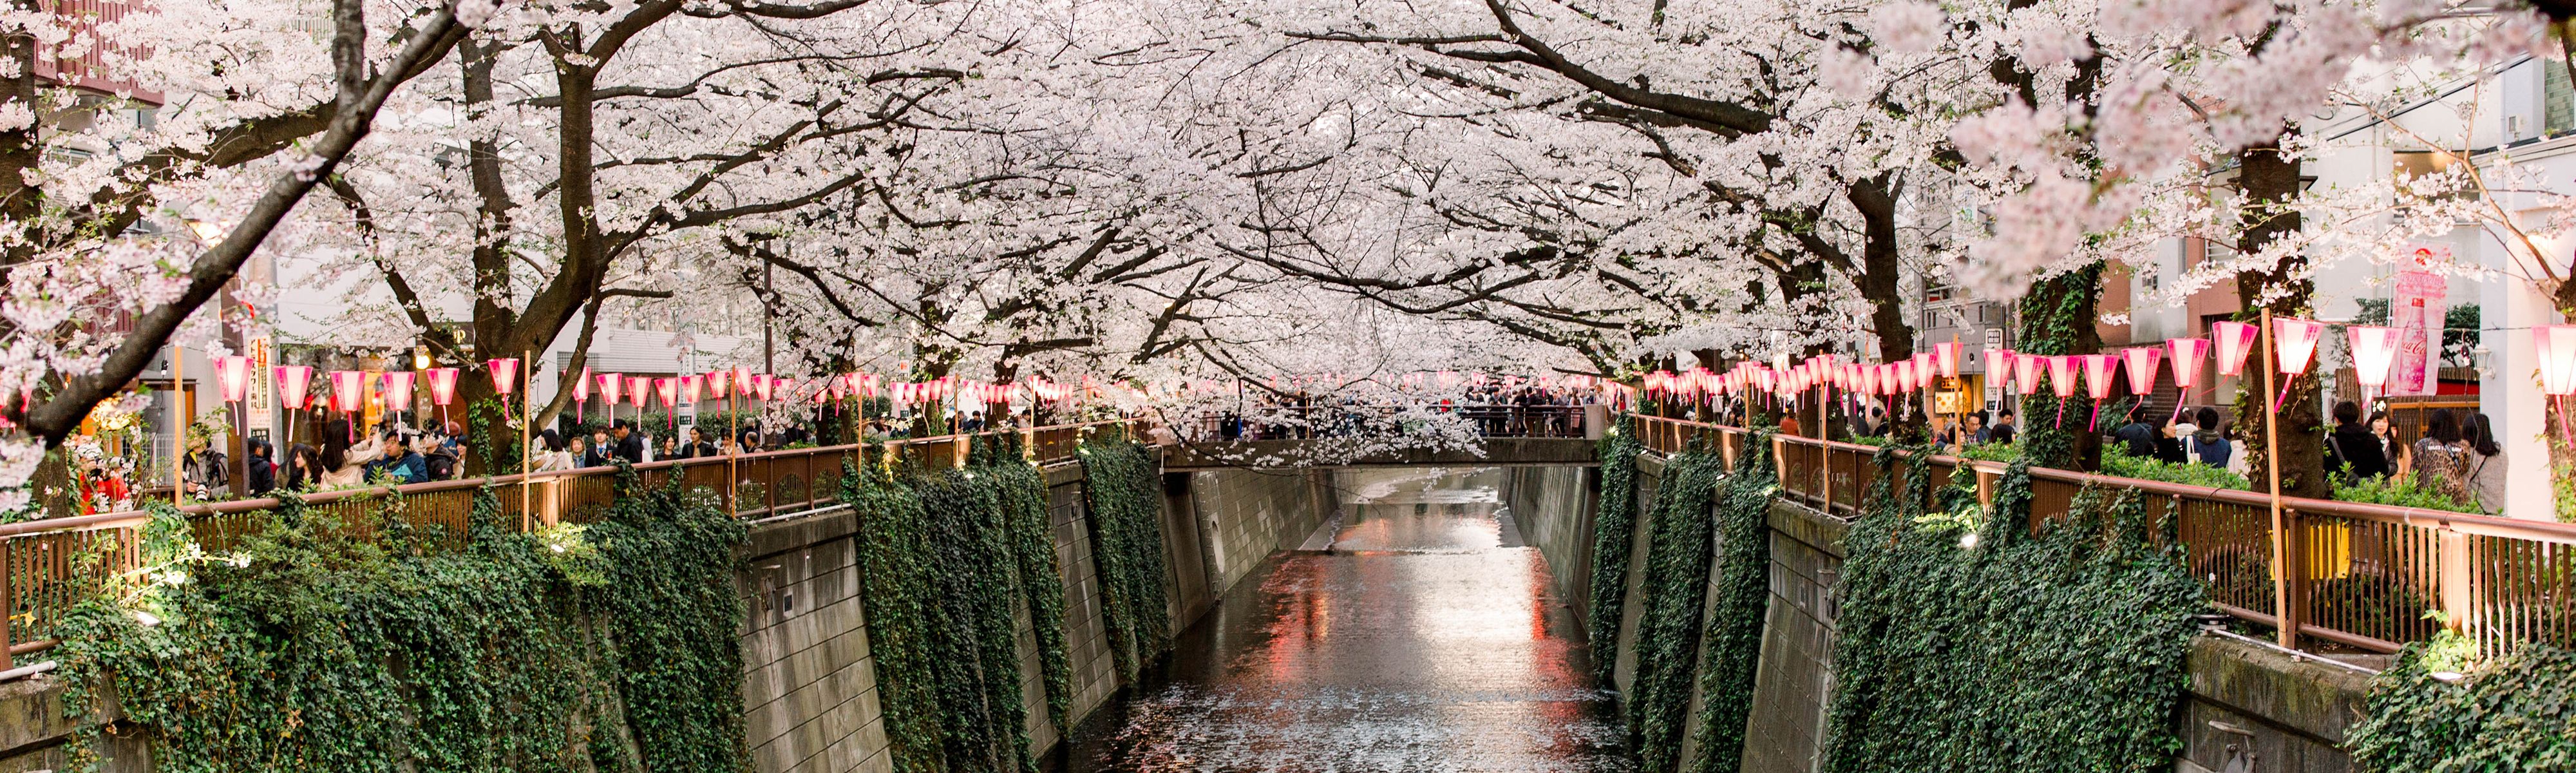 pink paper lanterns hanging from cherry blossom trees lined along a canal in tokyo japan